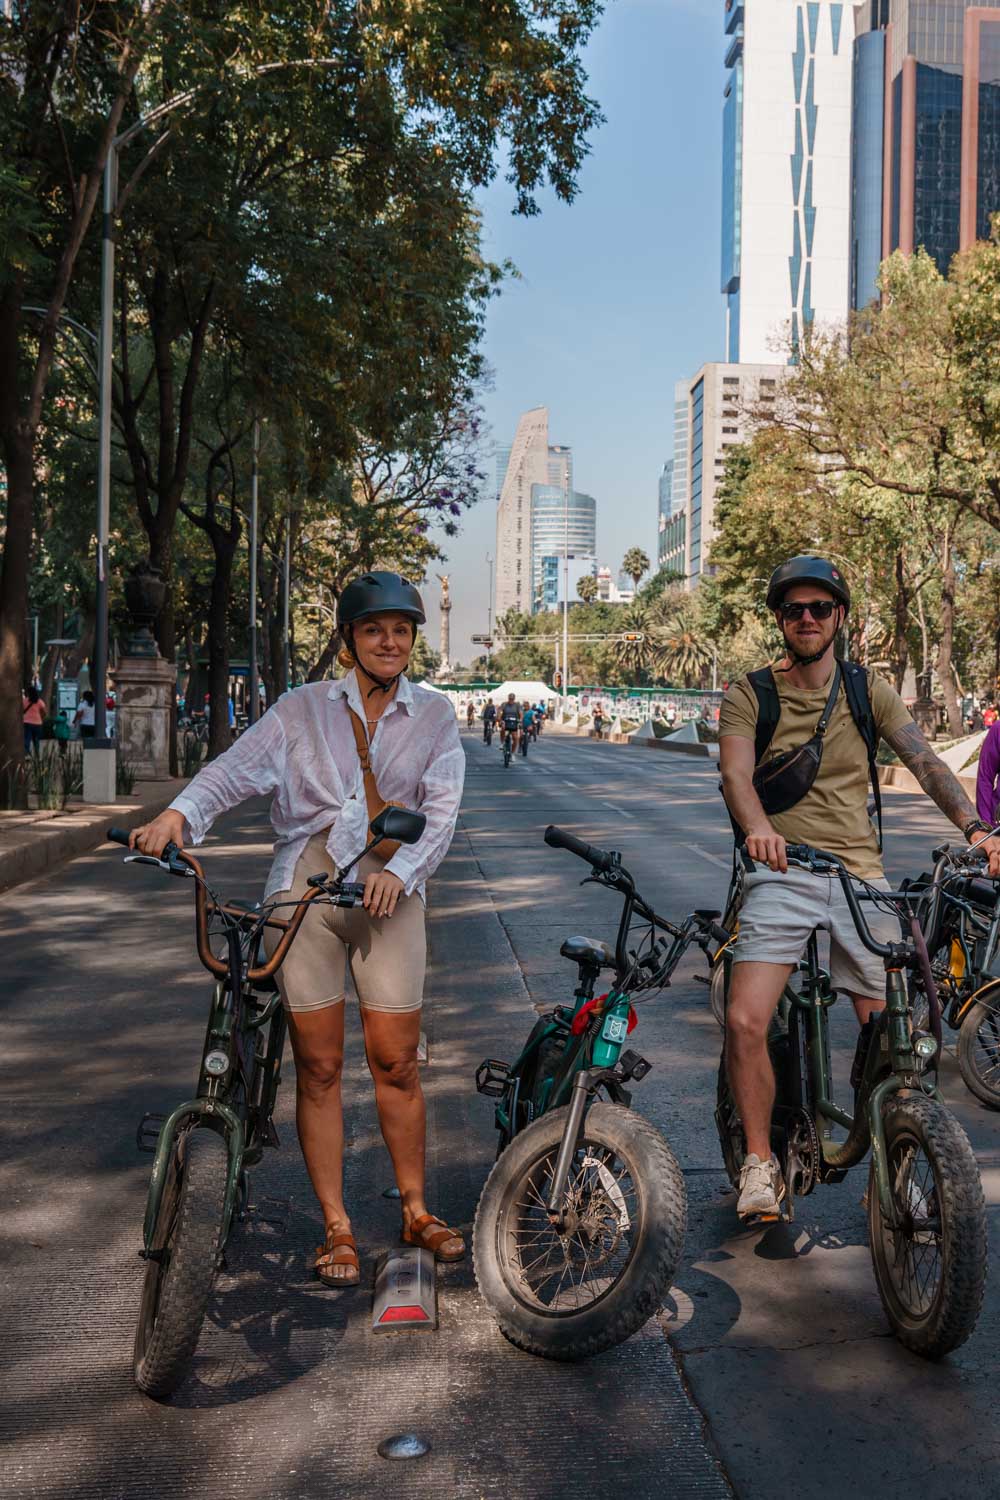 Cost of living in Mexico City can be low if you do free activities such as cycling.